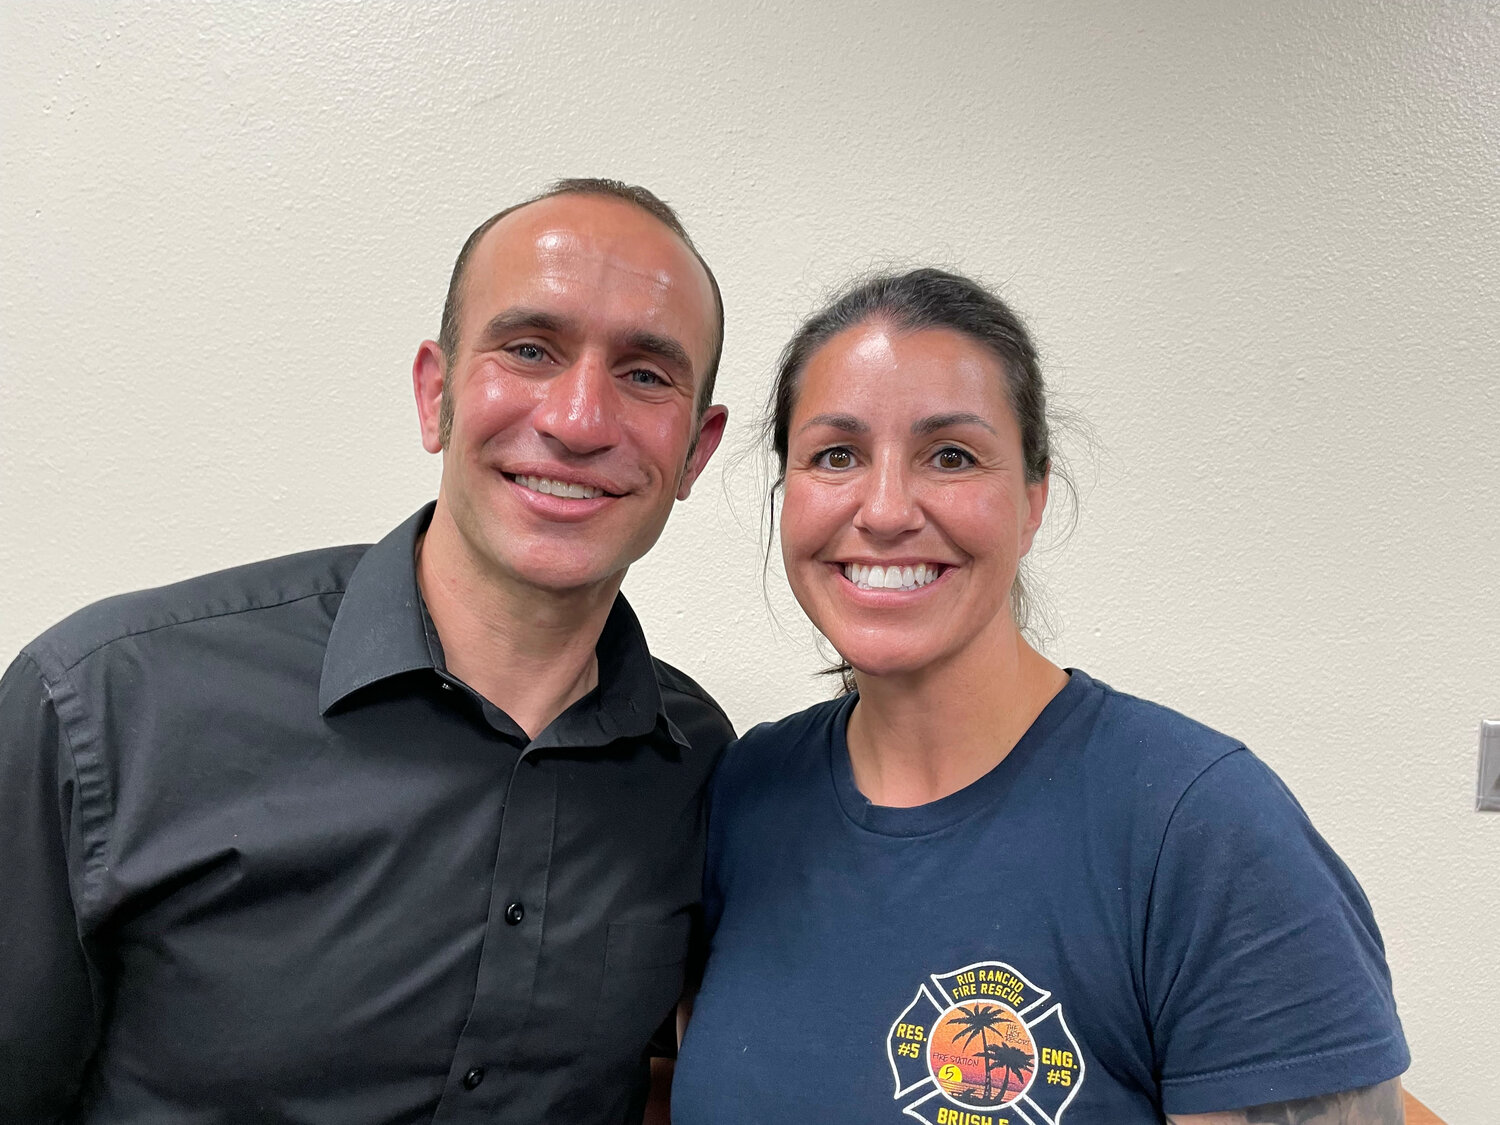 Michael Lengendre, the new Bernalillo fire chief, poses for a picture with his wife Maria, also a career firefighter.